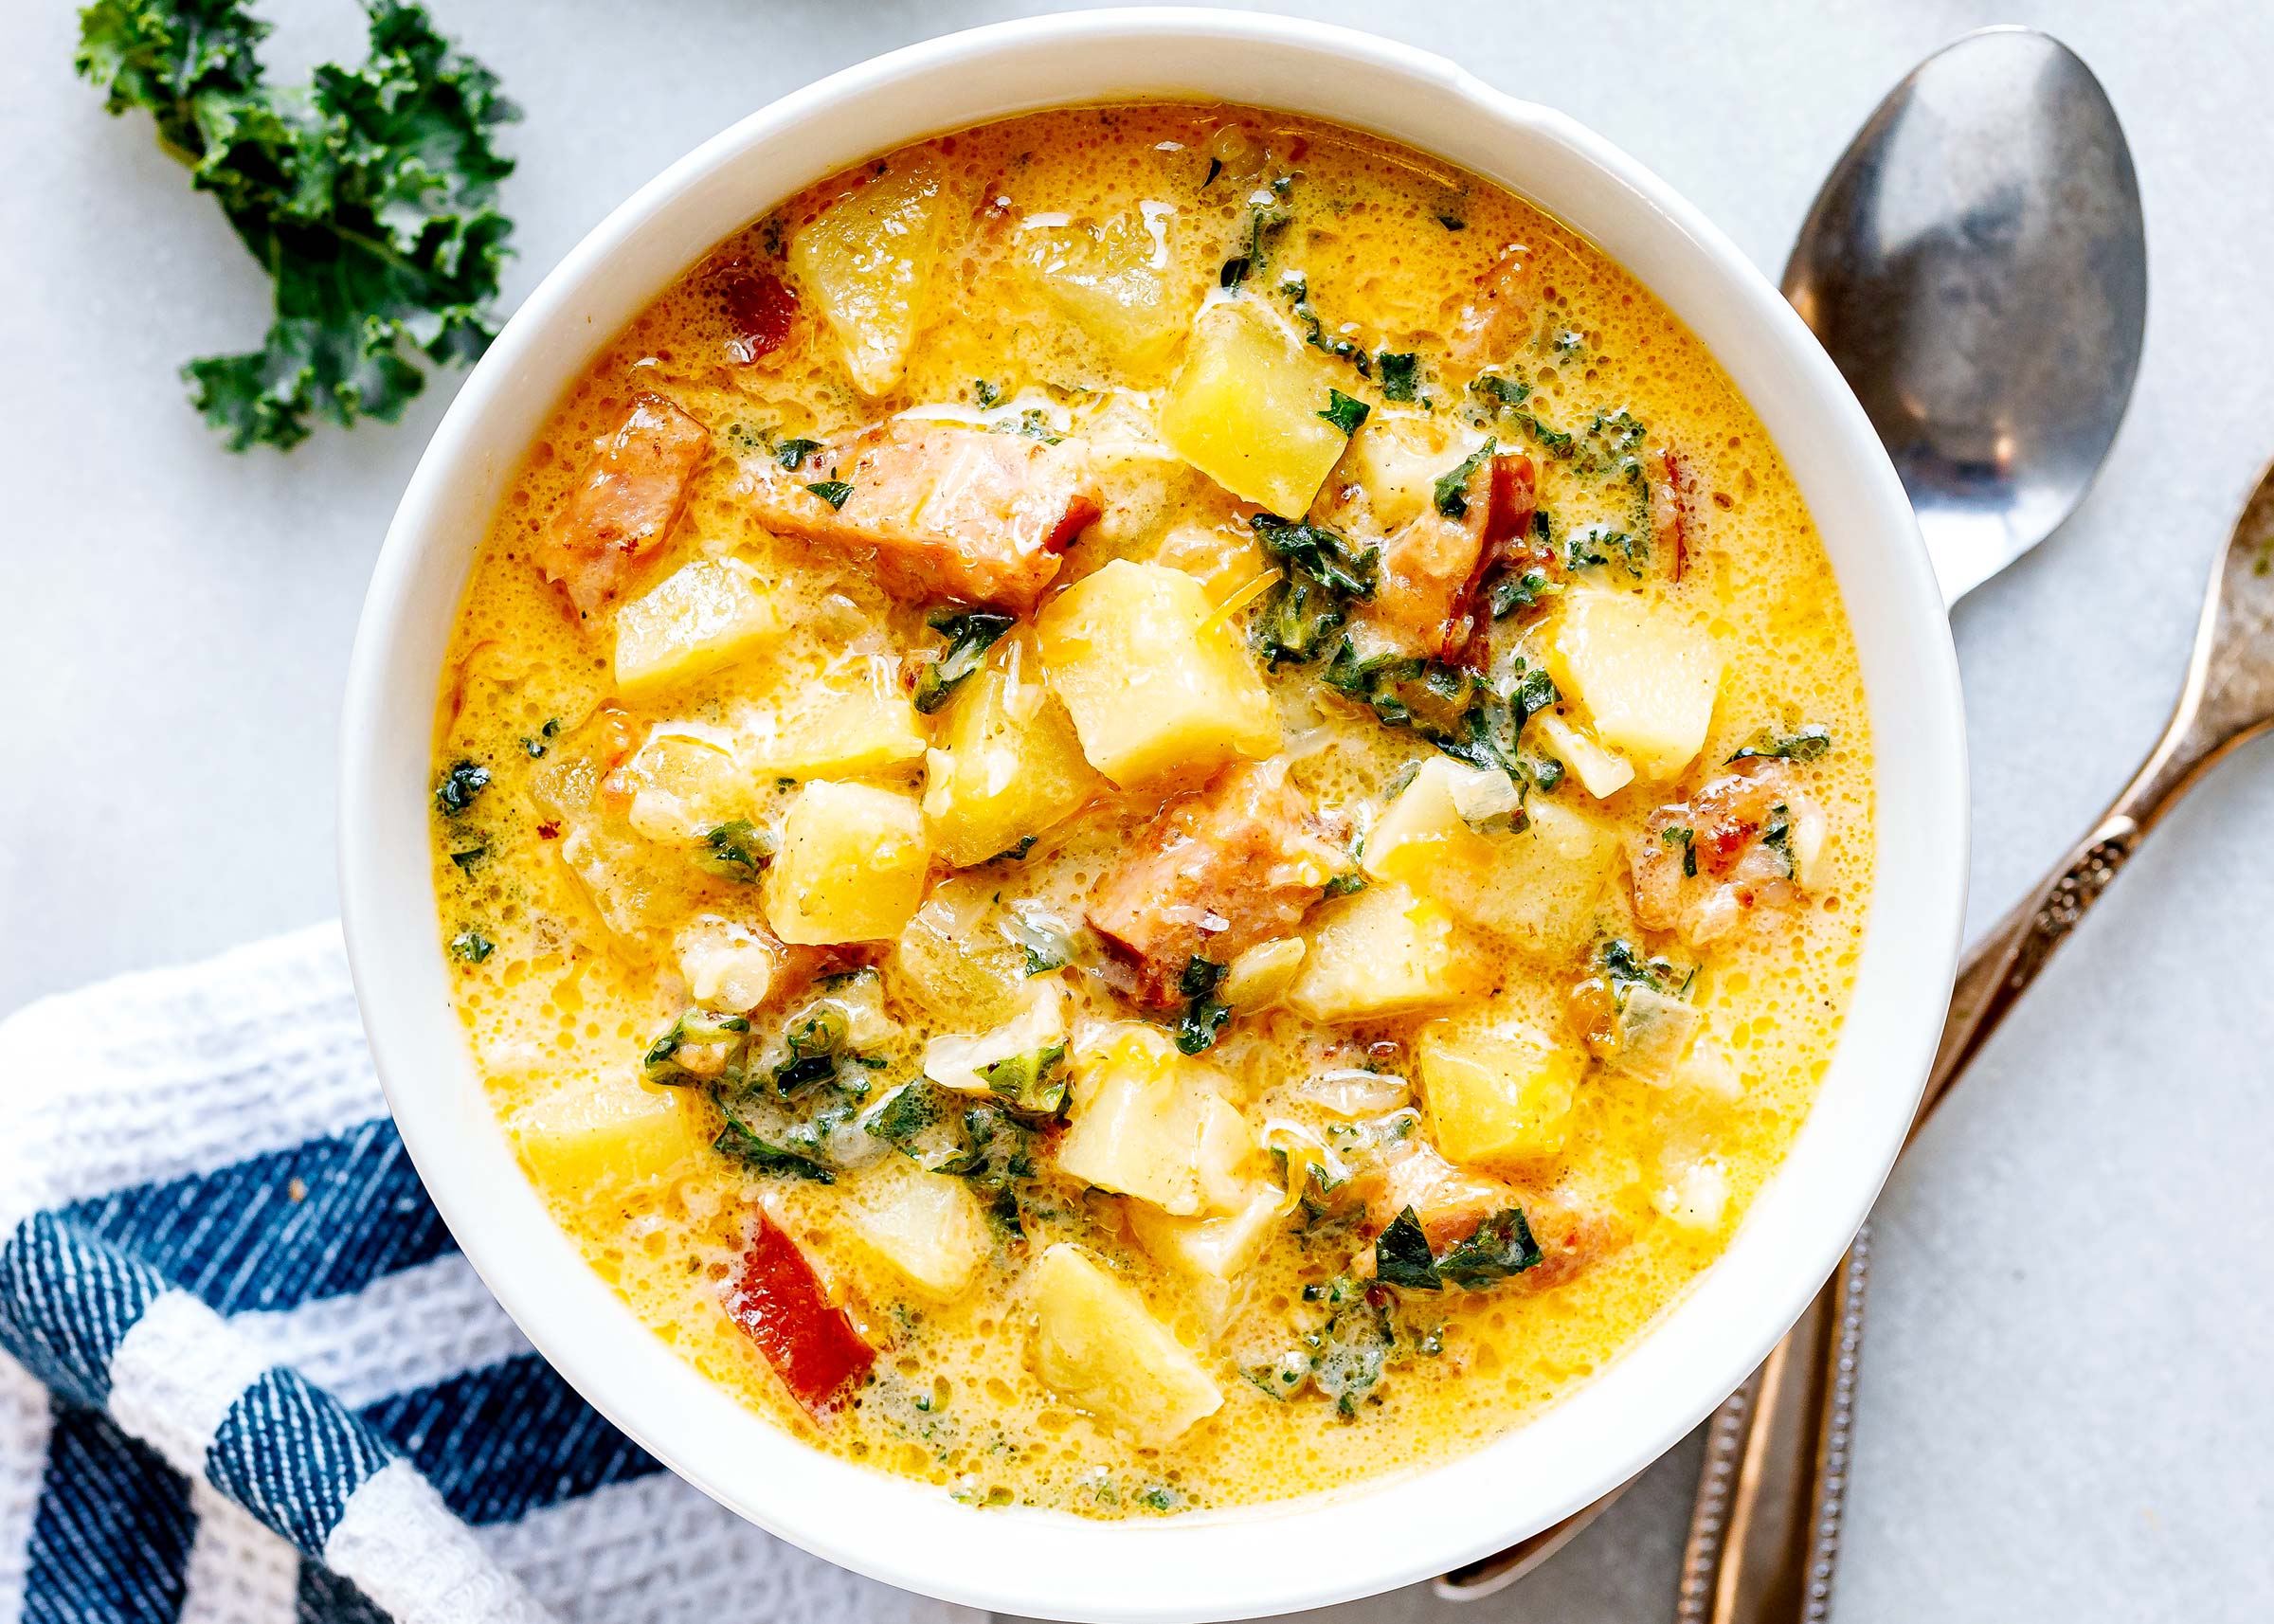 Instant Pot Creamy Sausage Soup with Kale and Potato